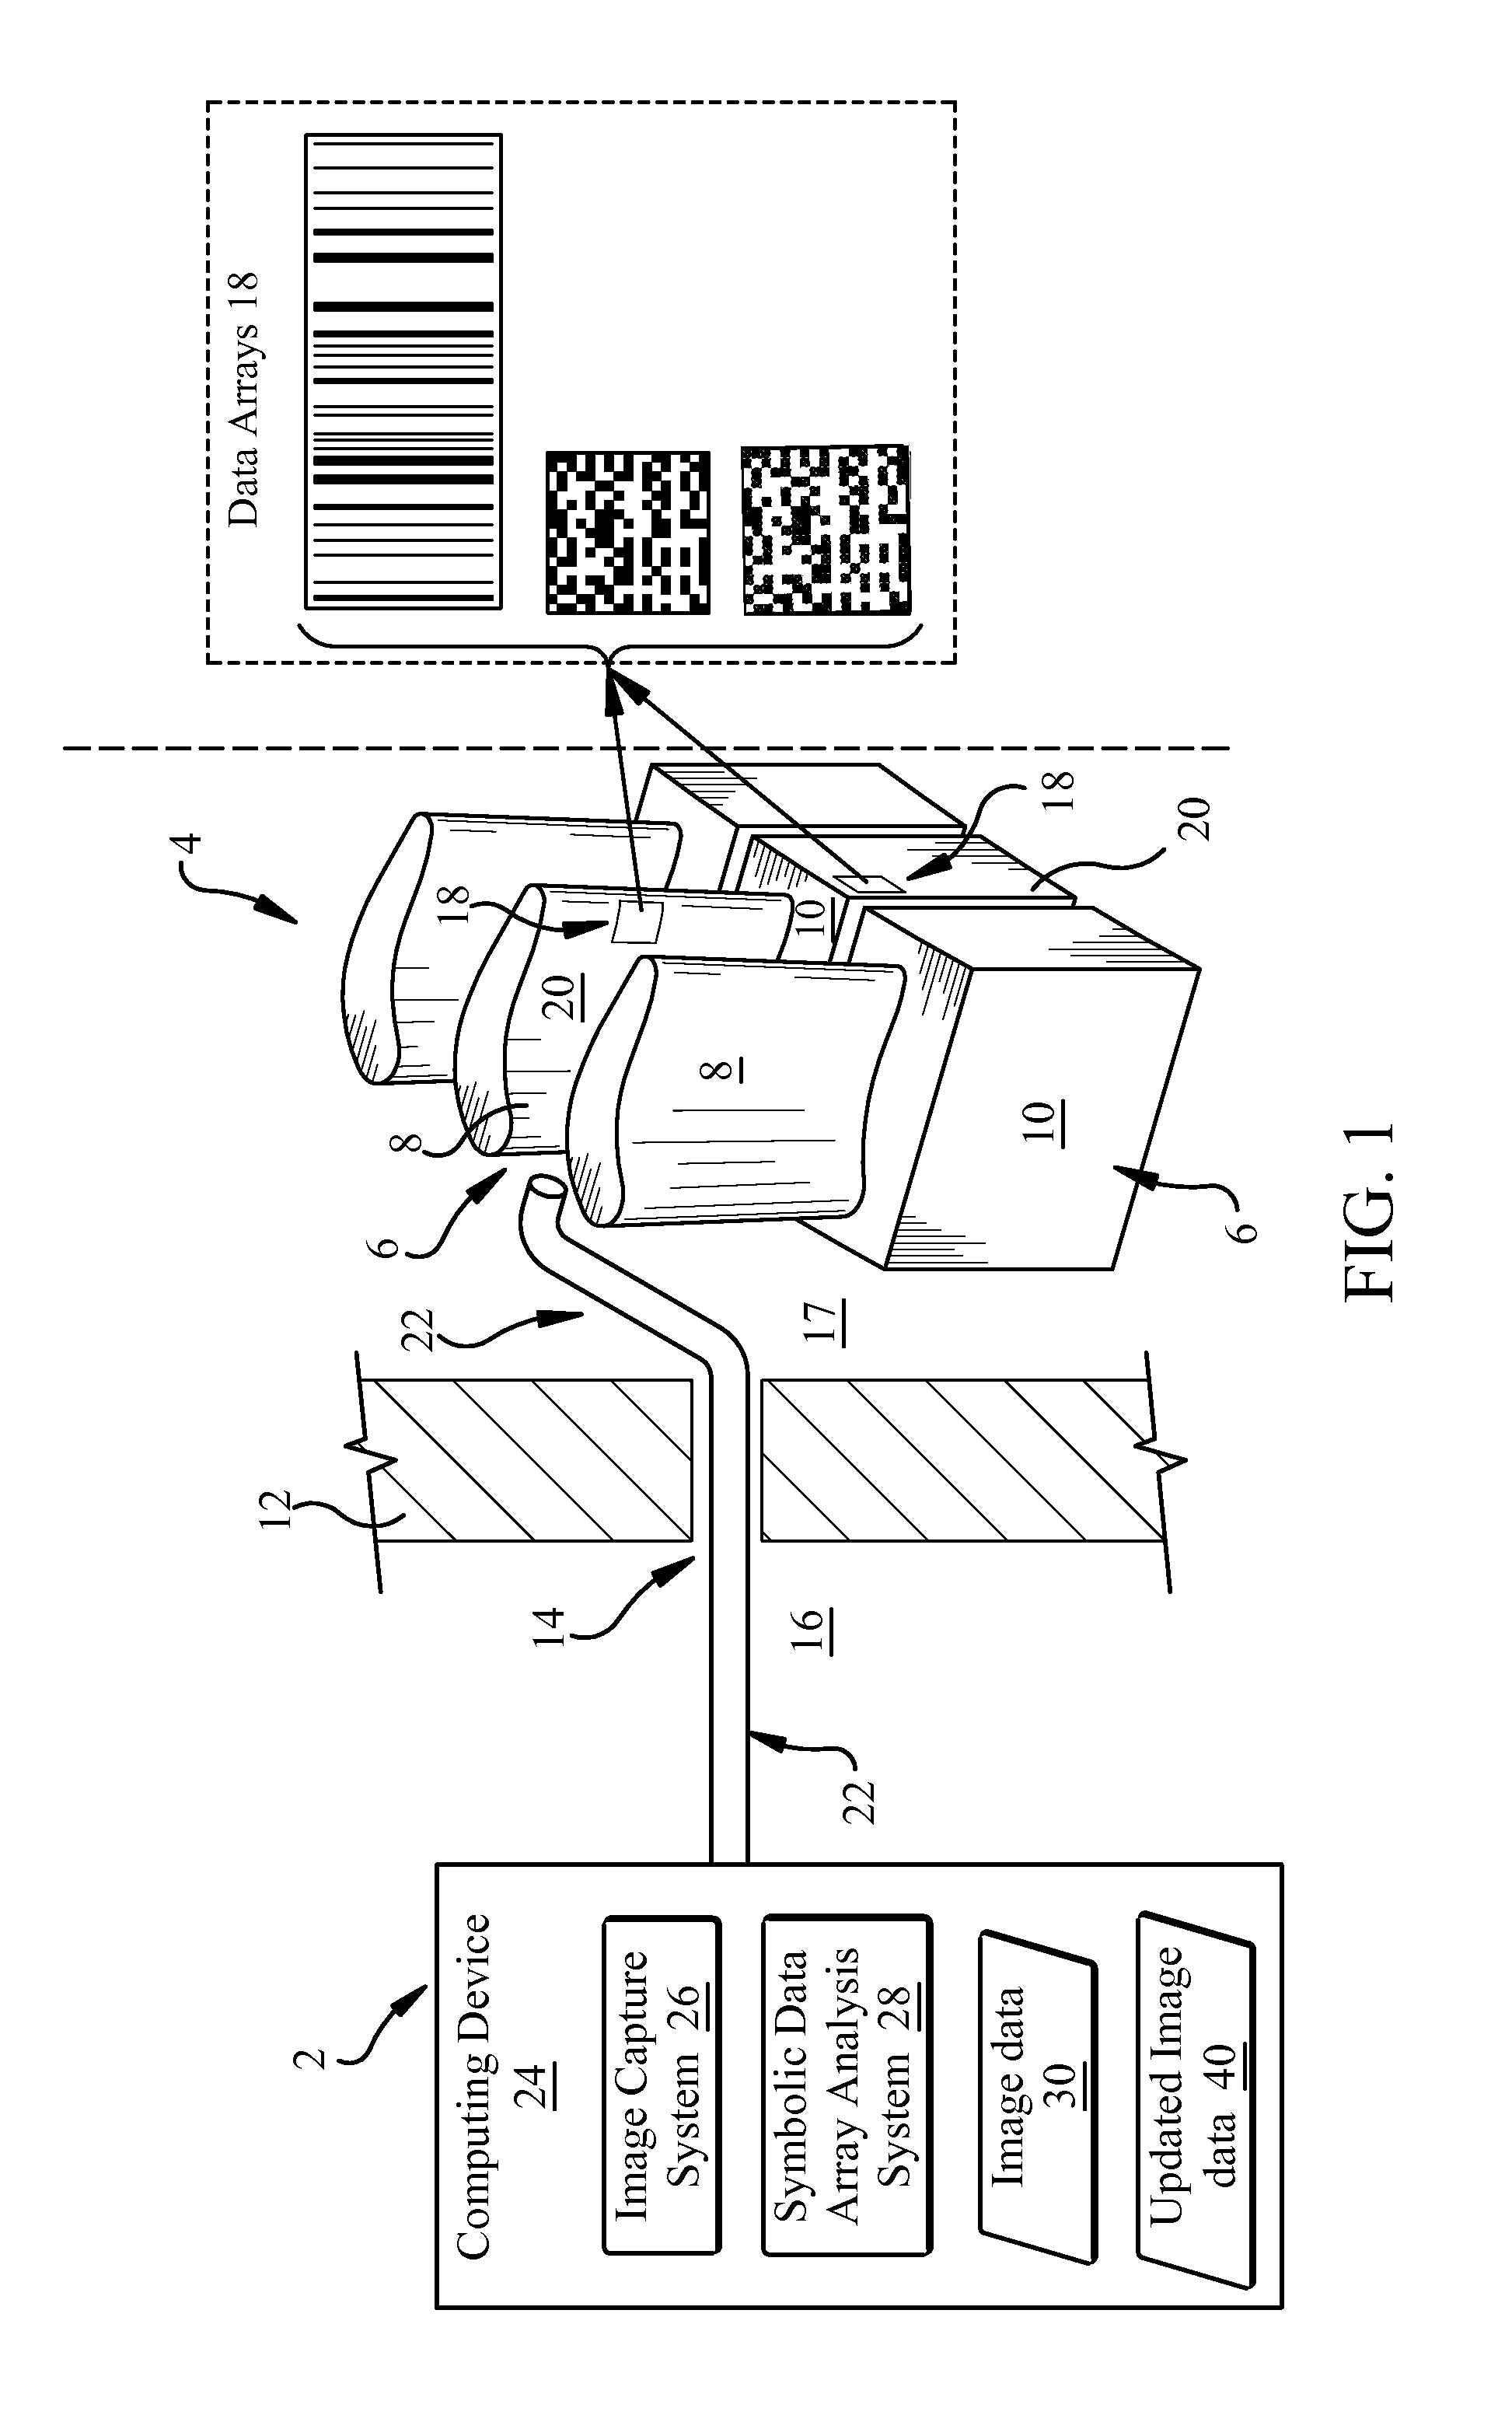 Turbomachine component monitoring system and method